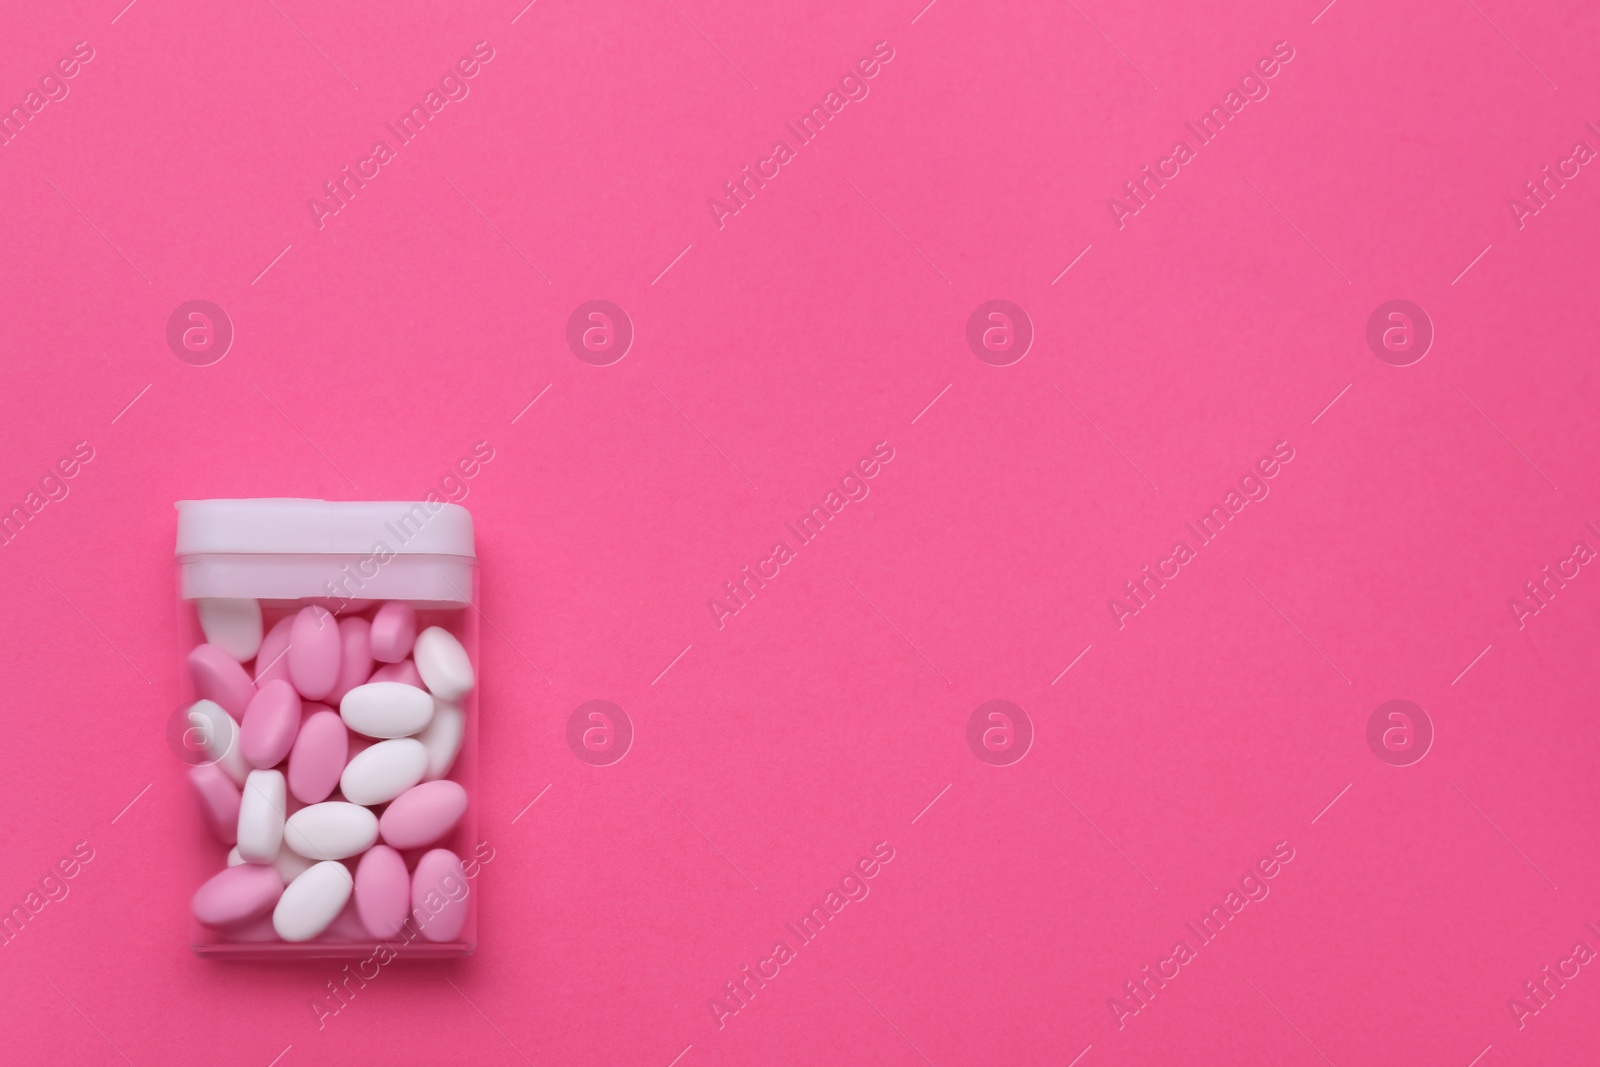 Photo of Many dragee candies in container on pink background, top view. Space for text